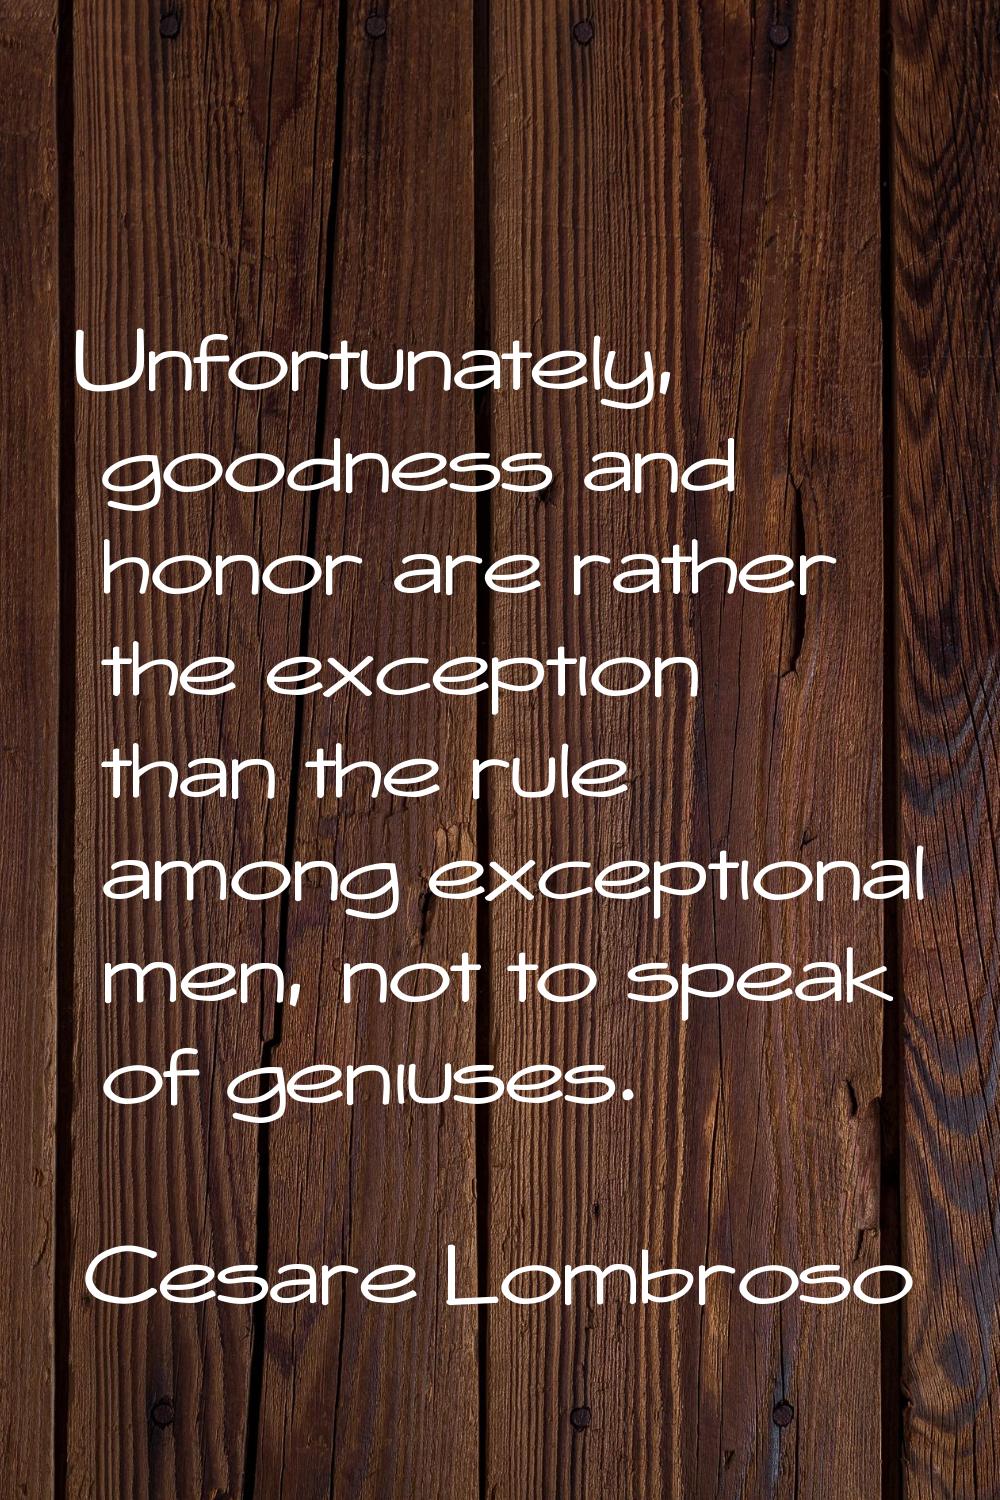 Unfortunately, goodness and honor are rather the exception than the rule among exceptional men, not